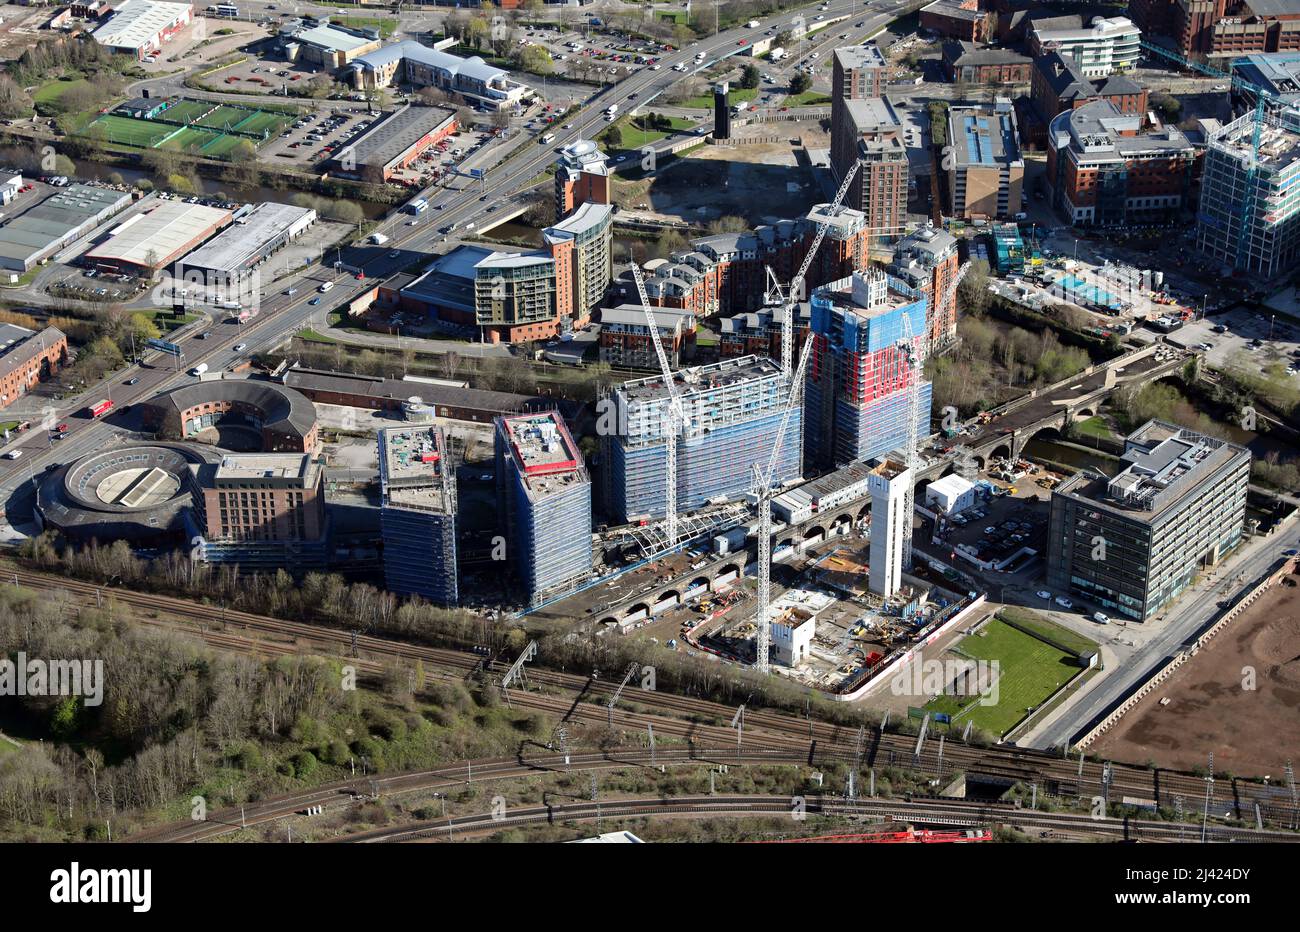 aerial view of the west Leeds city centre with a new development between Whitehall Road (bottom right) and the A58 road (top left) the main subject Stock Photo